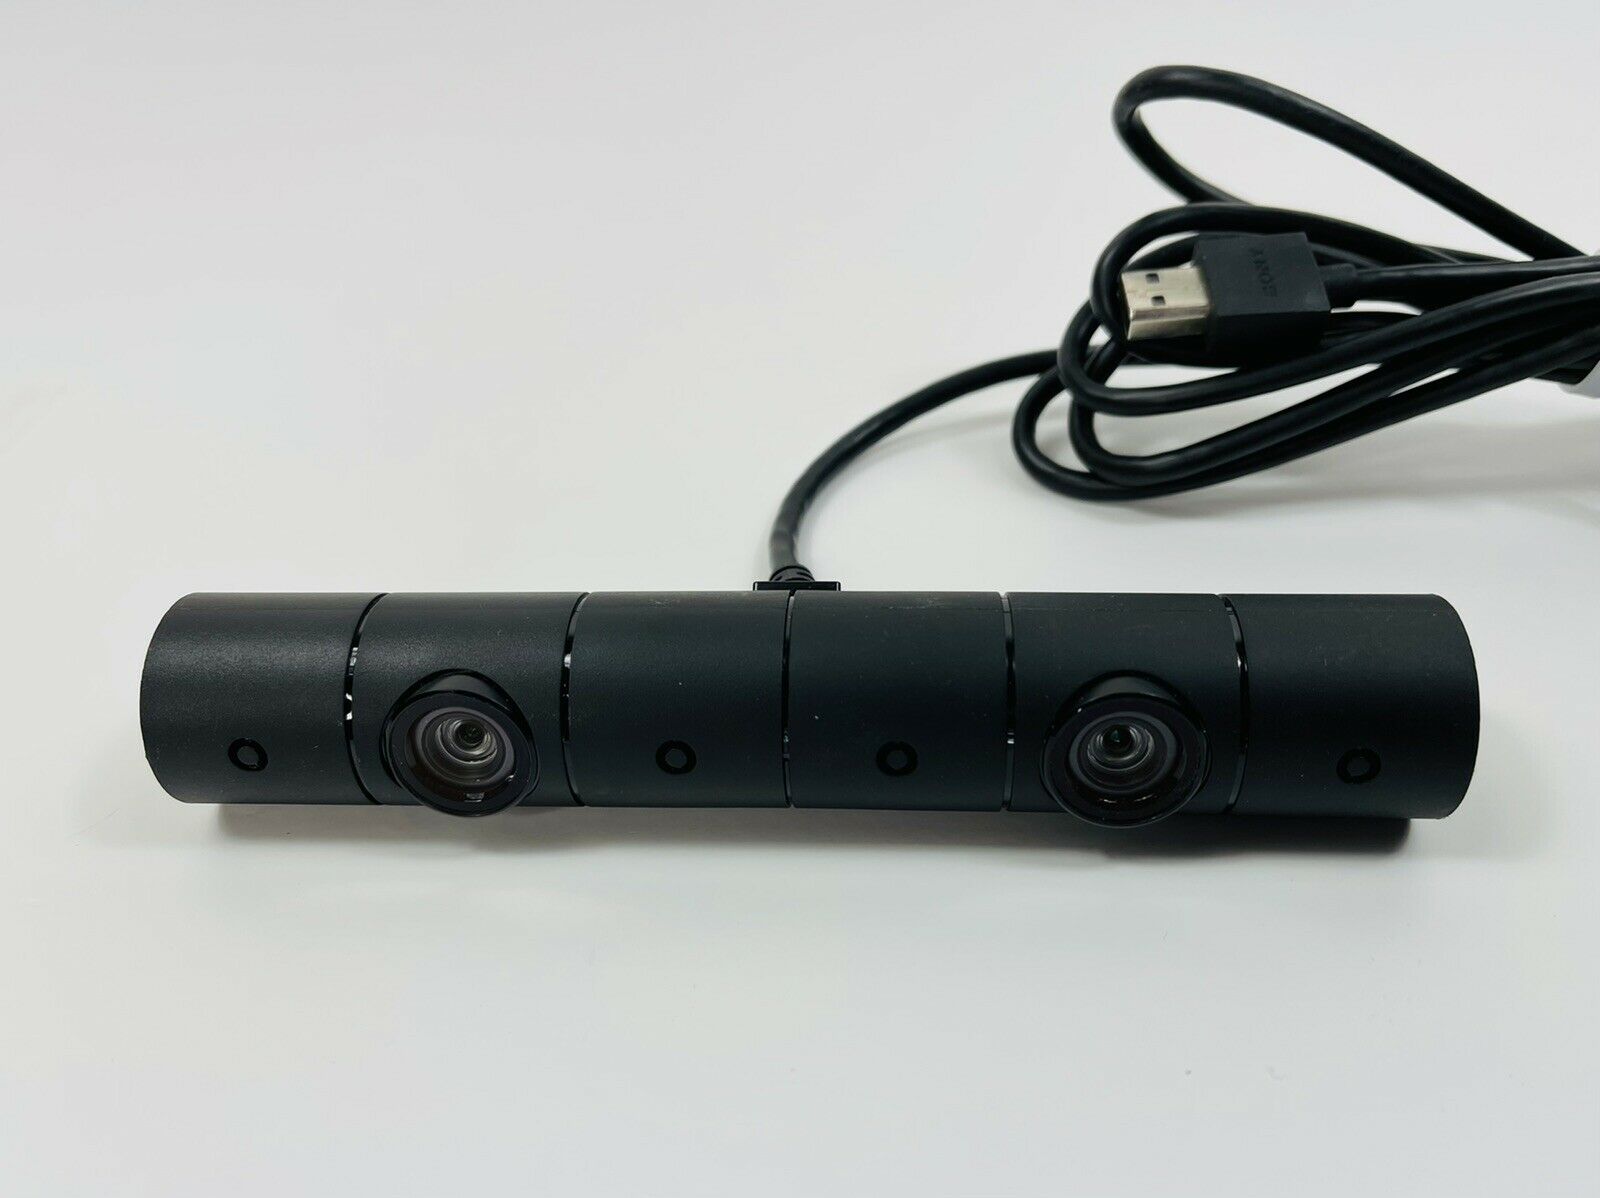 Sony PlayStation Camera for PlayStation 4 (Previous Model